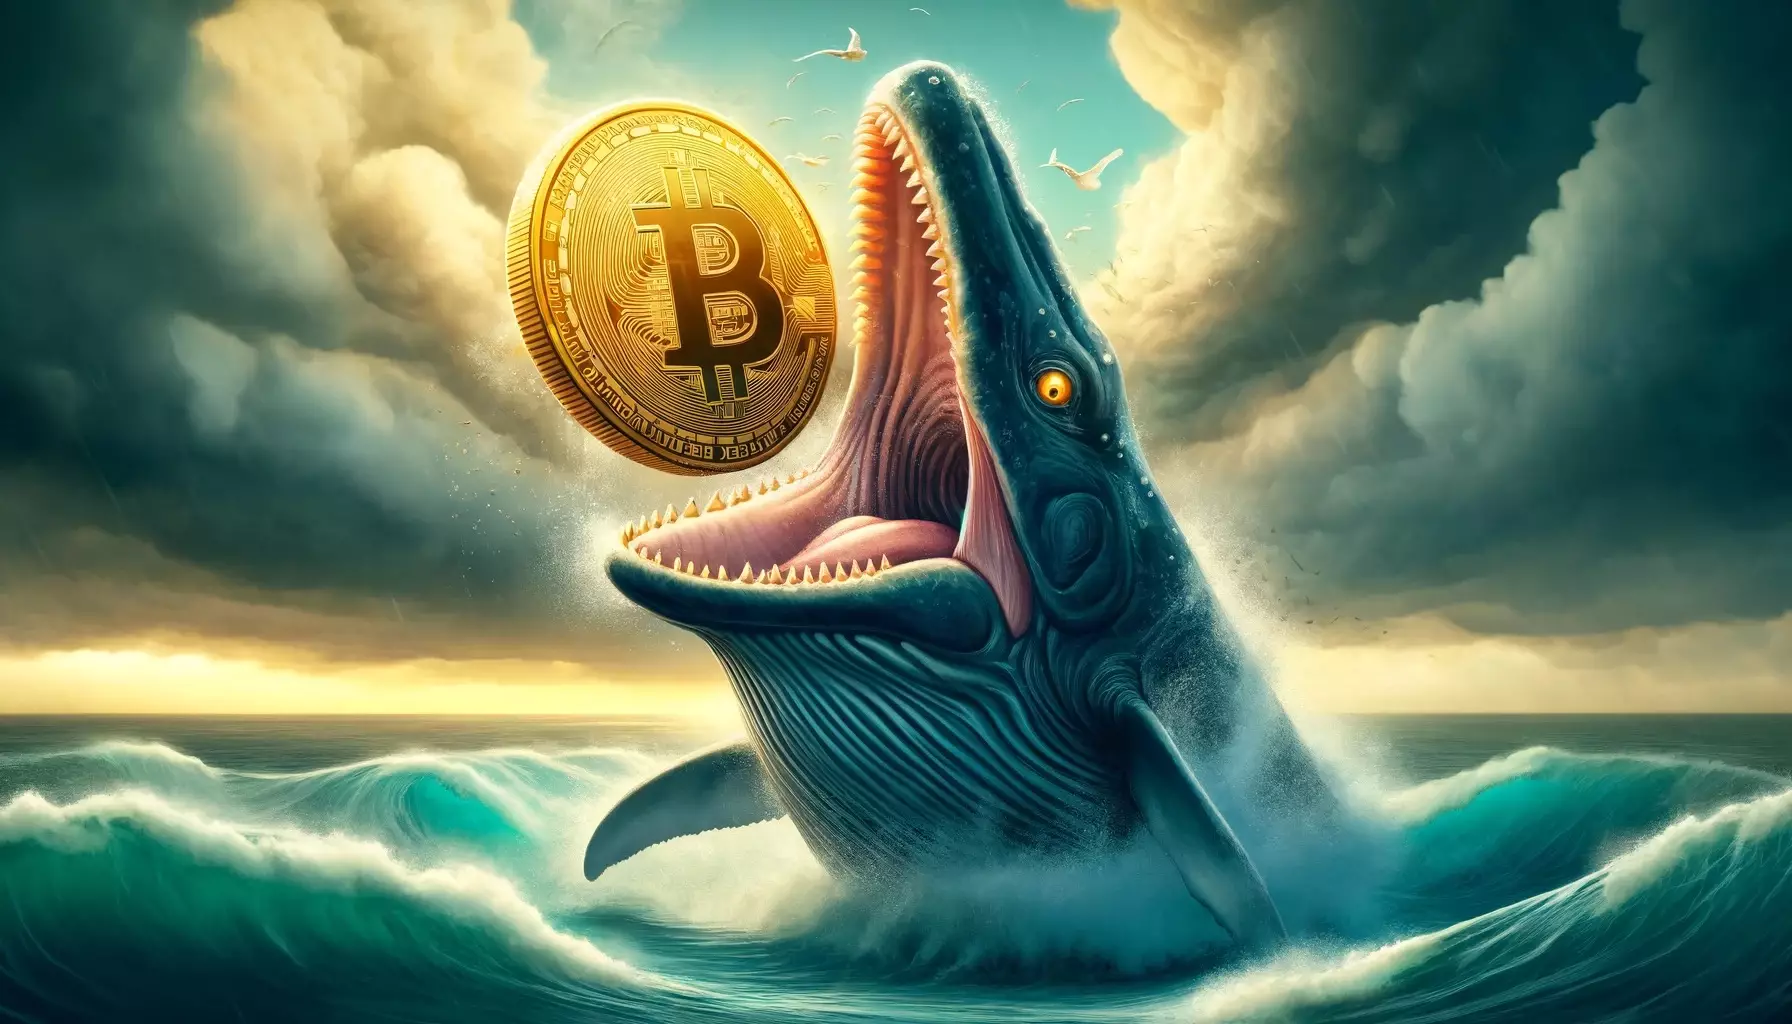 Bitcoin Whales Buying Up Billions as Small Investors Sell